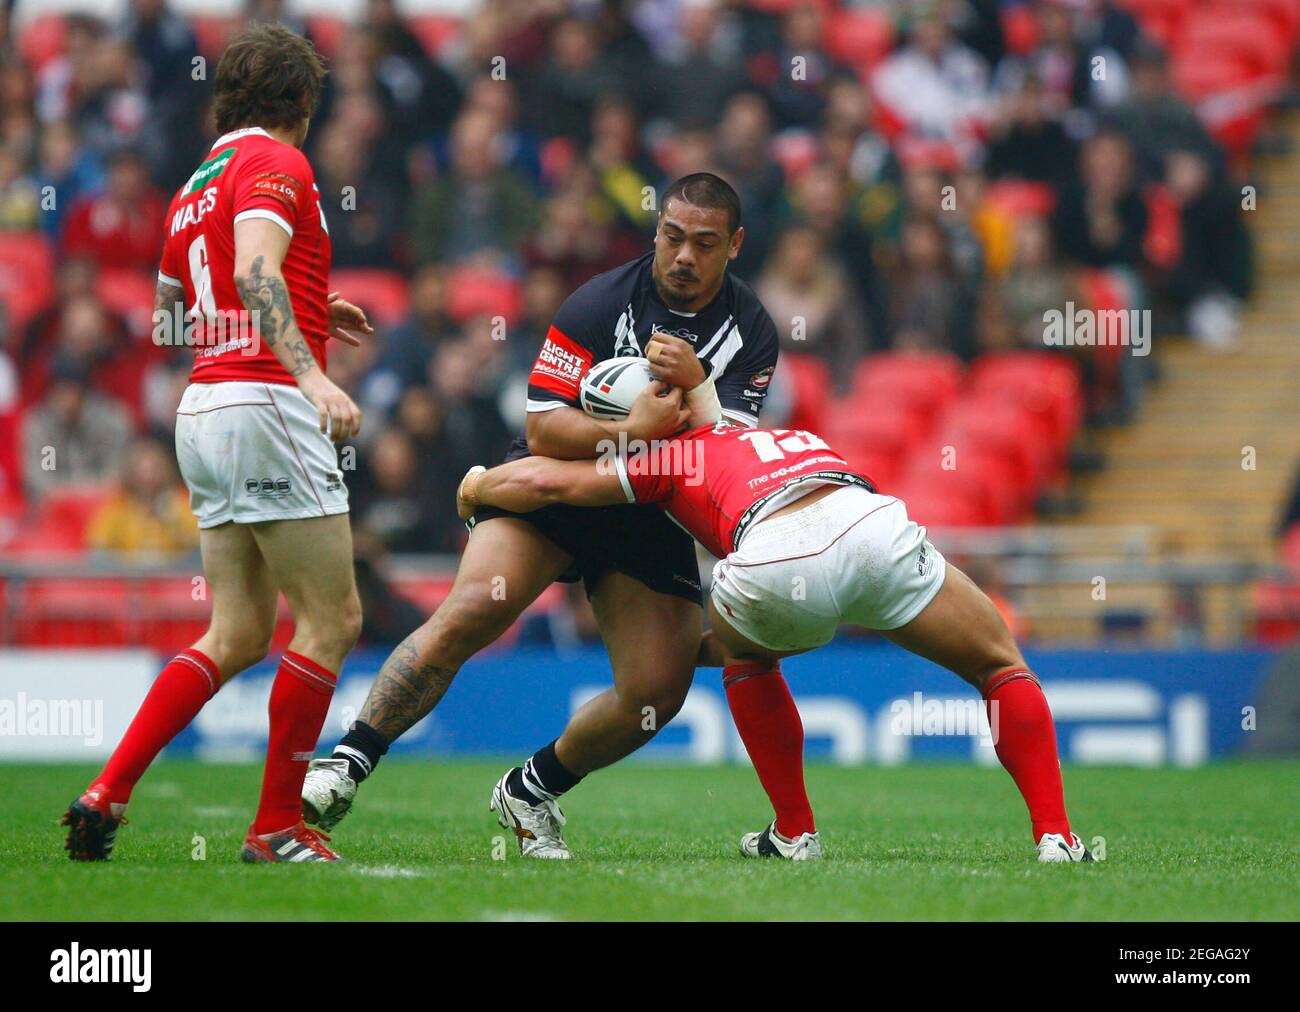 Rugby League - Wales v New Zealand - Gillette Four Nations 2011 - Wembley Stadium - 5/11/11  New Zealand's Sika Manu (C) in action  Mandatory Credit: Action Images / Peter Cziborra Stock Photo